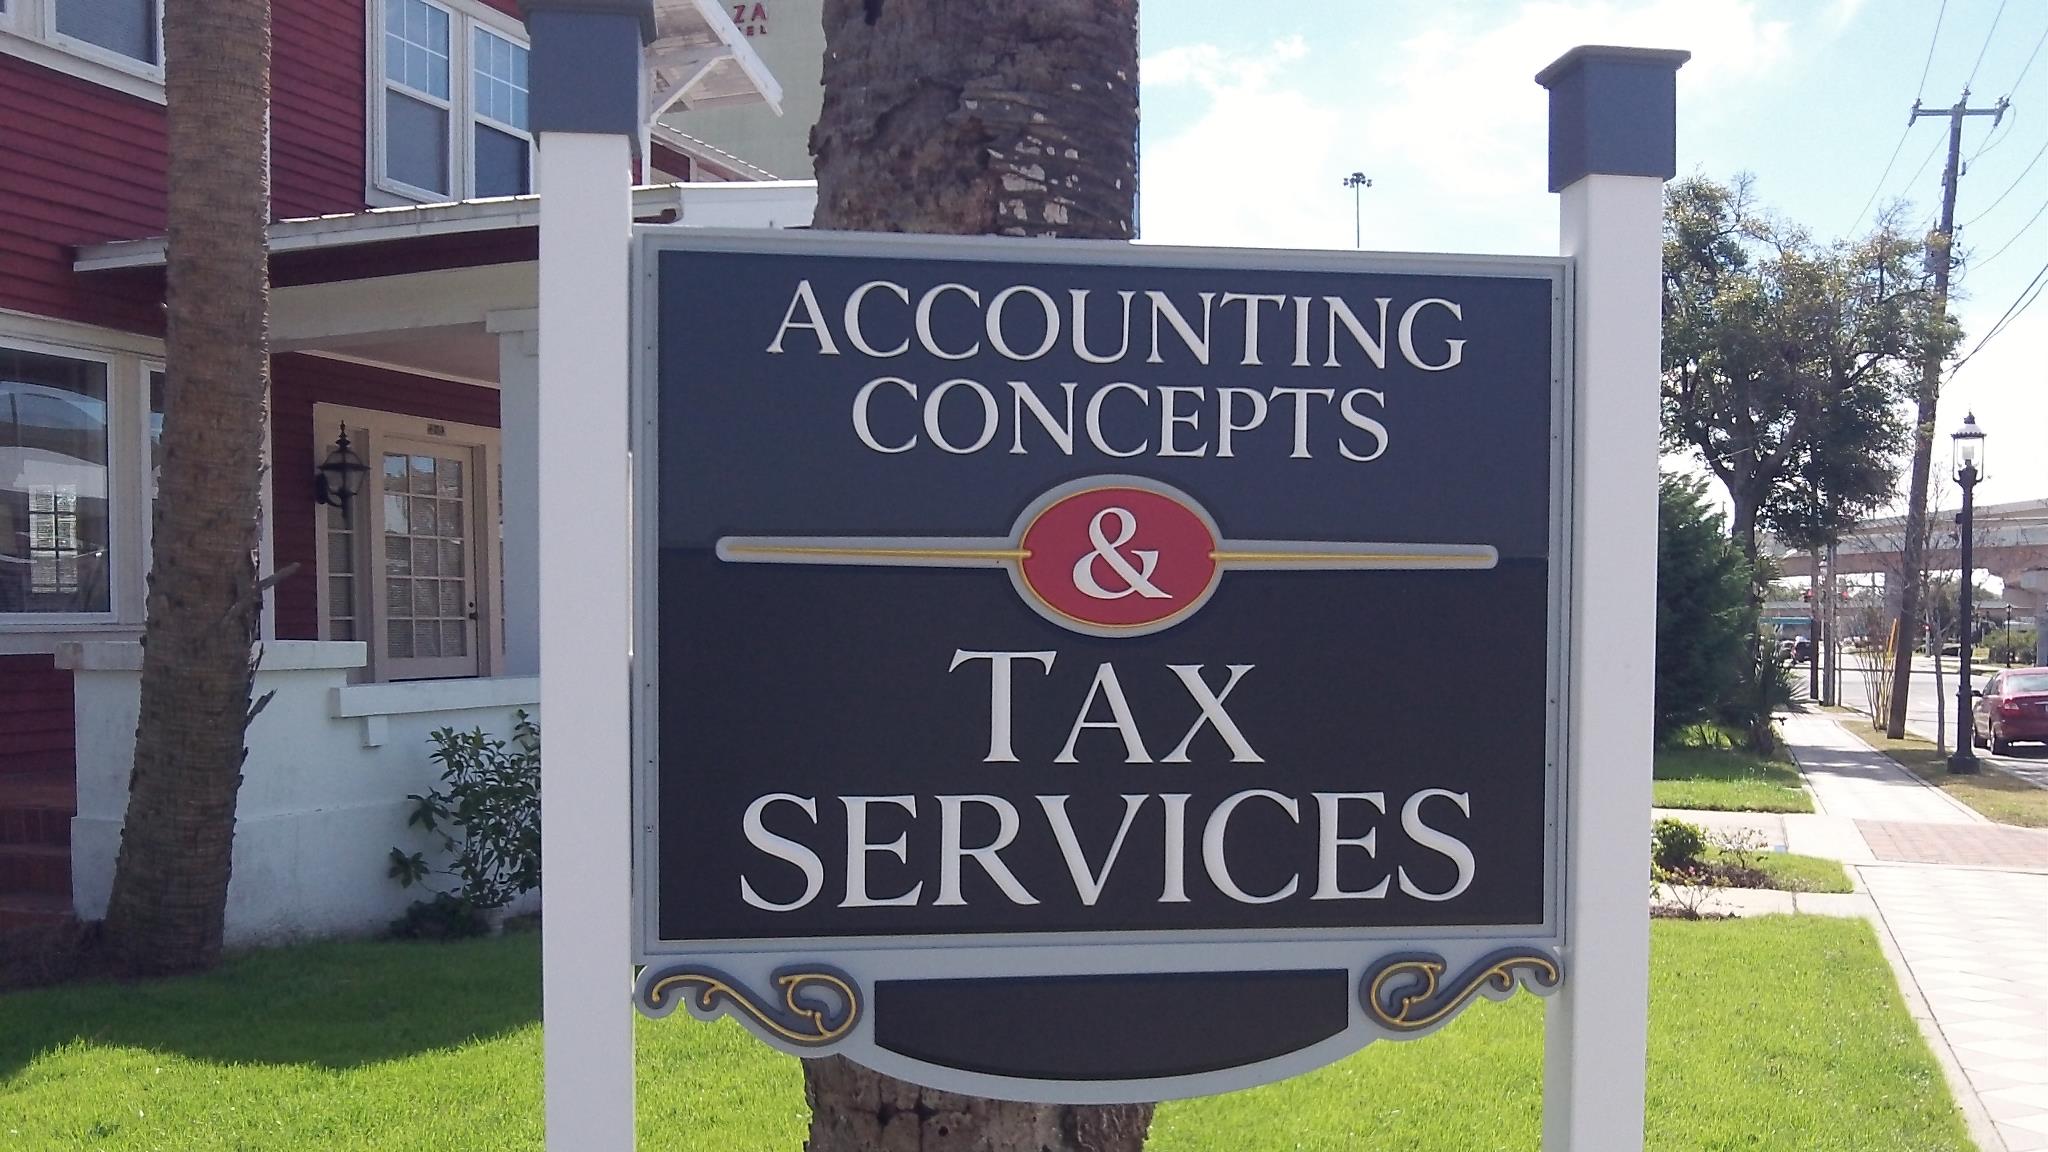 Accounting Concepts & Tax